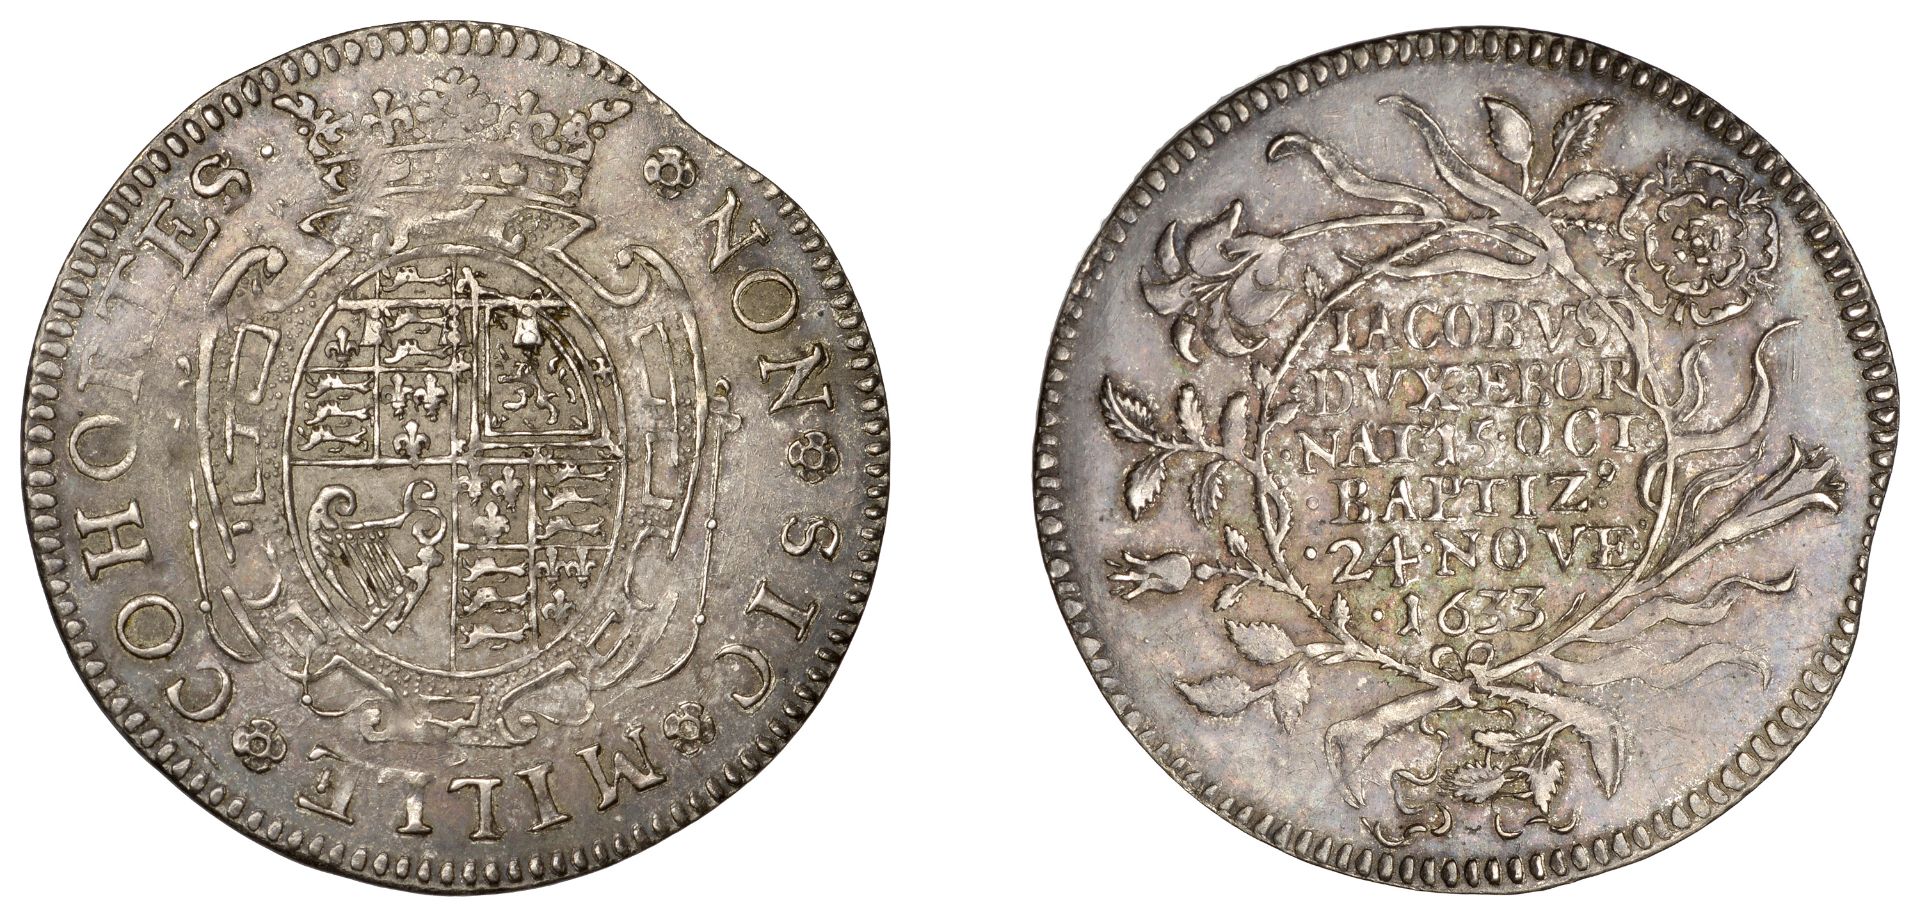 Baptism of Prince James, 1633, a silver medal by N. Briot, Princes's arms in ornately garnis...